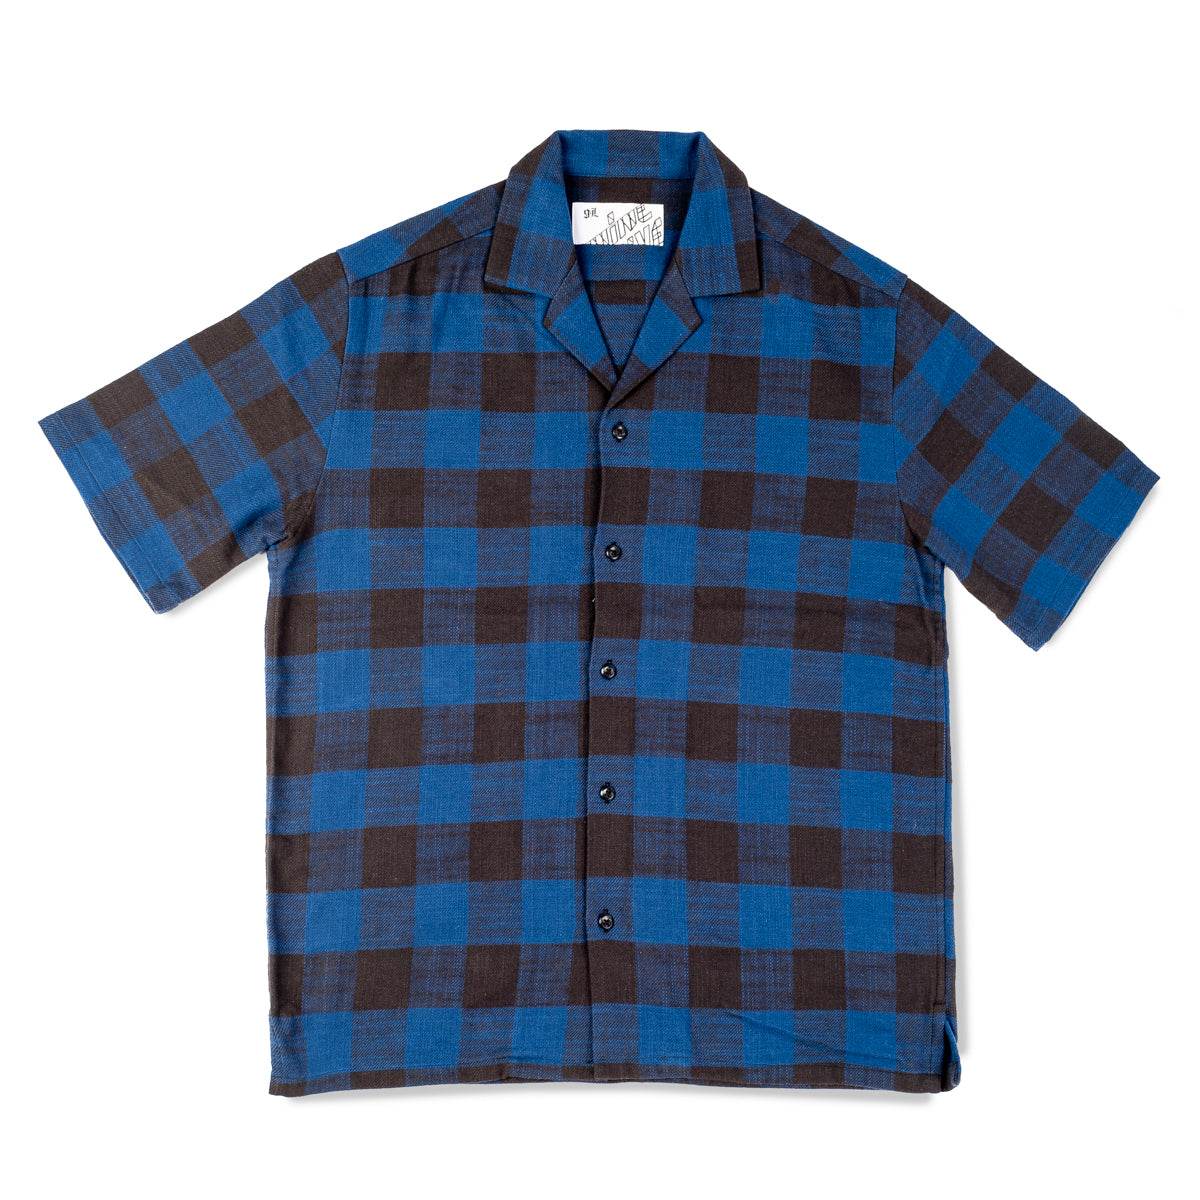 The 405 in Flannel (Short Sleeve) - Blue/Black